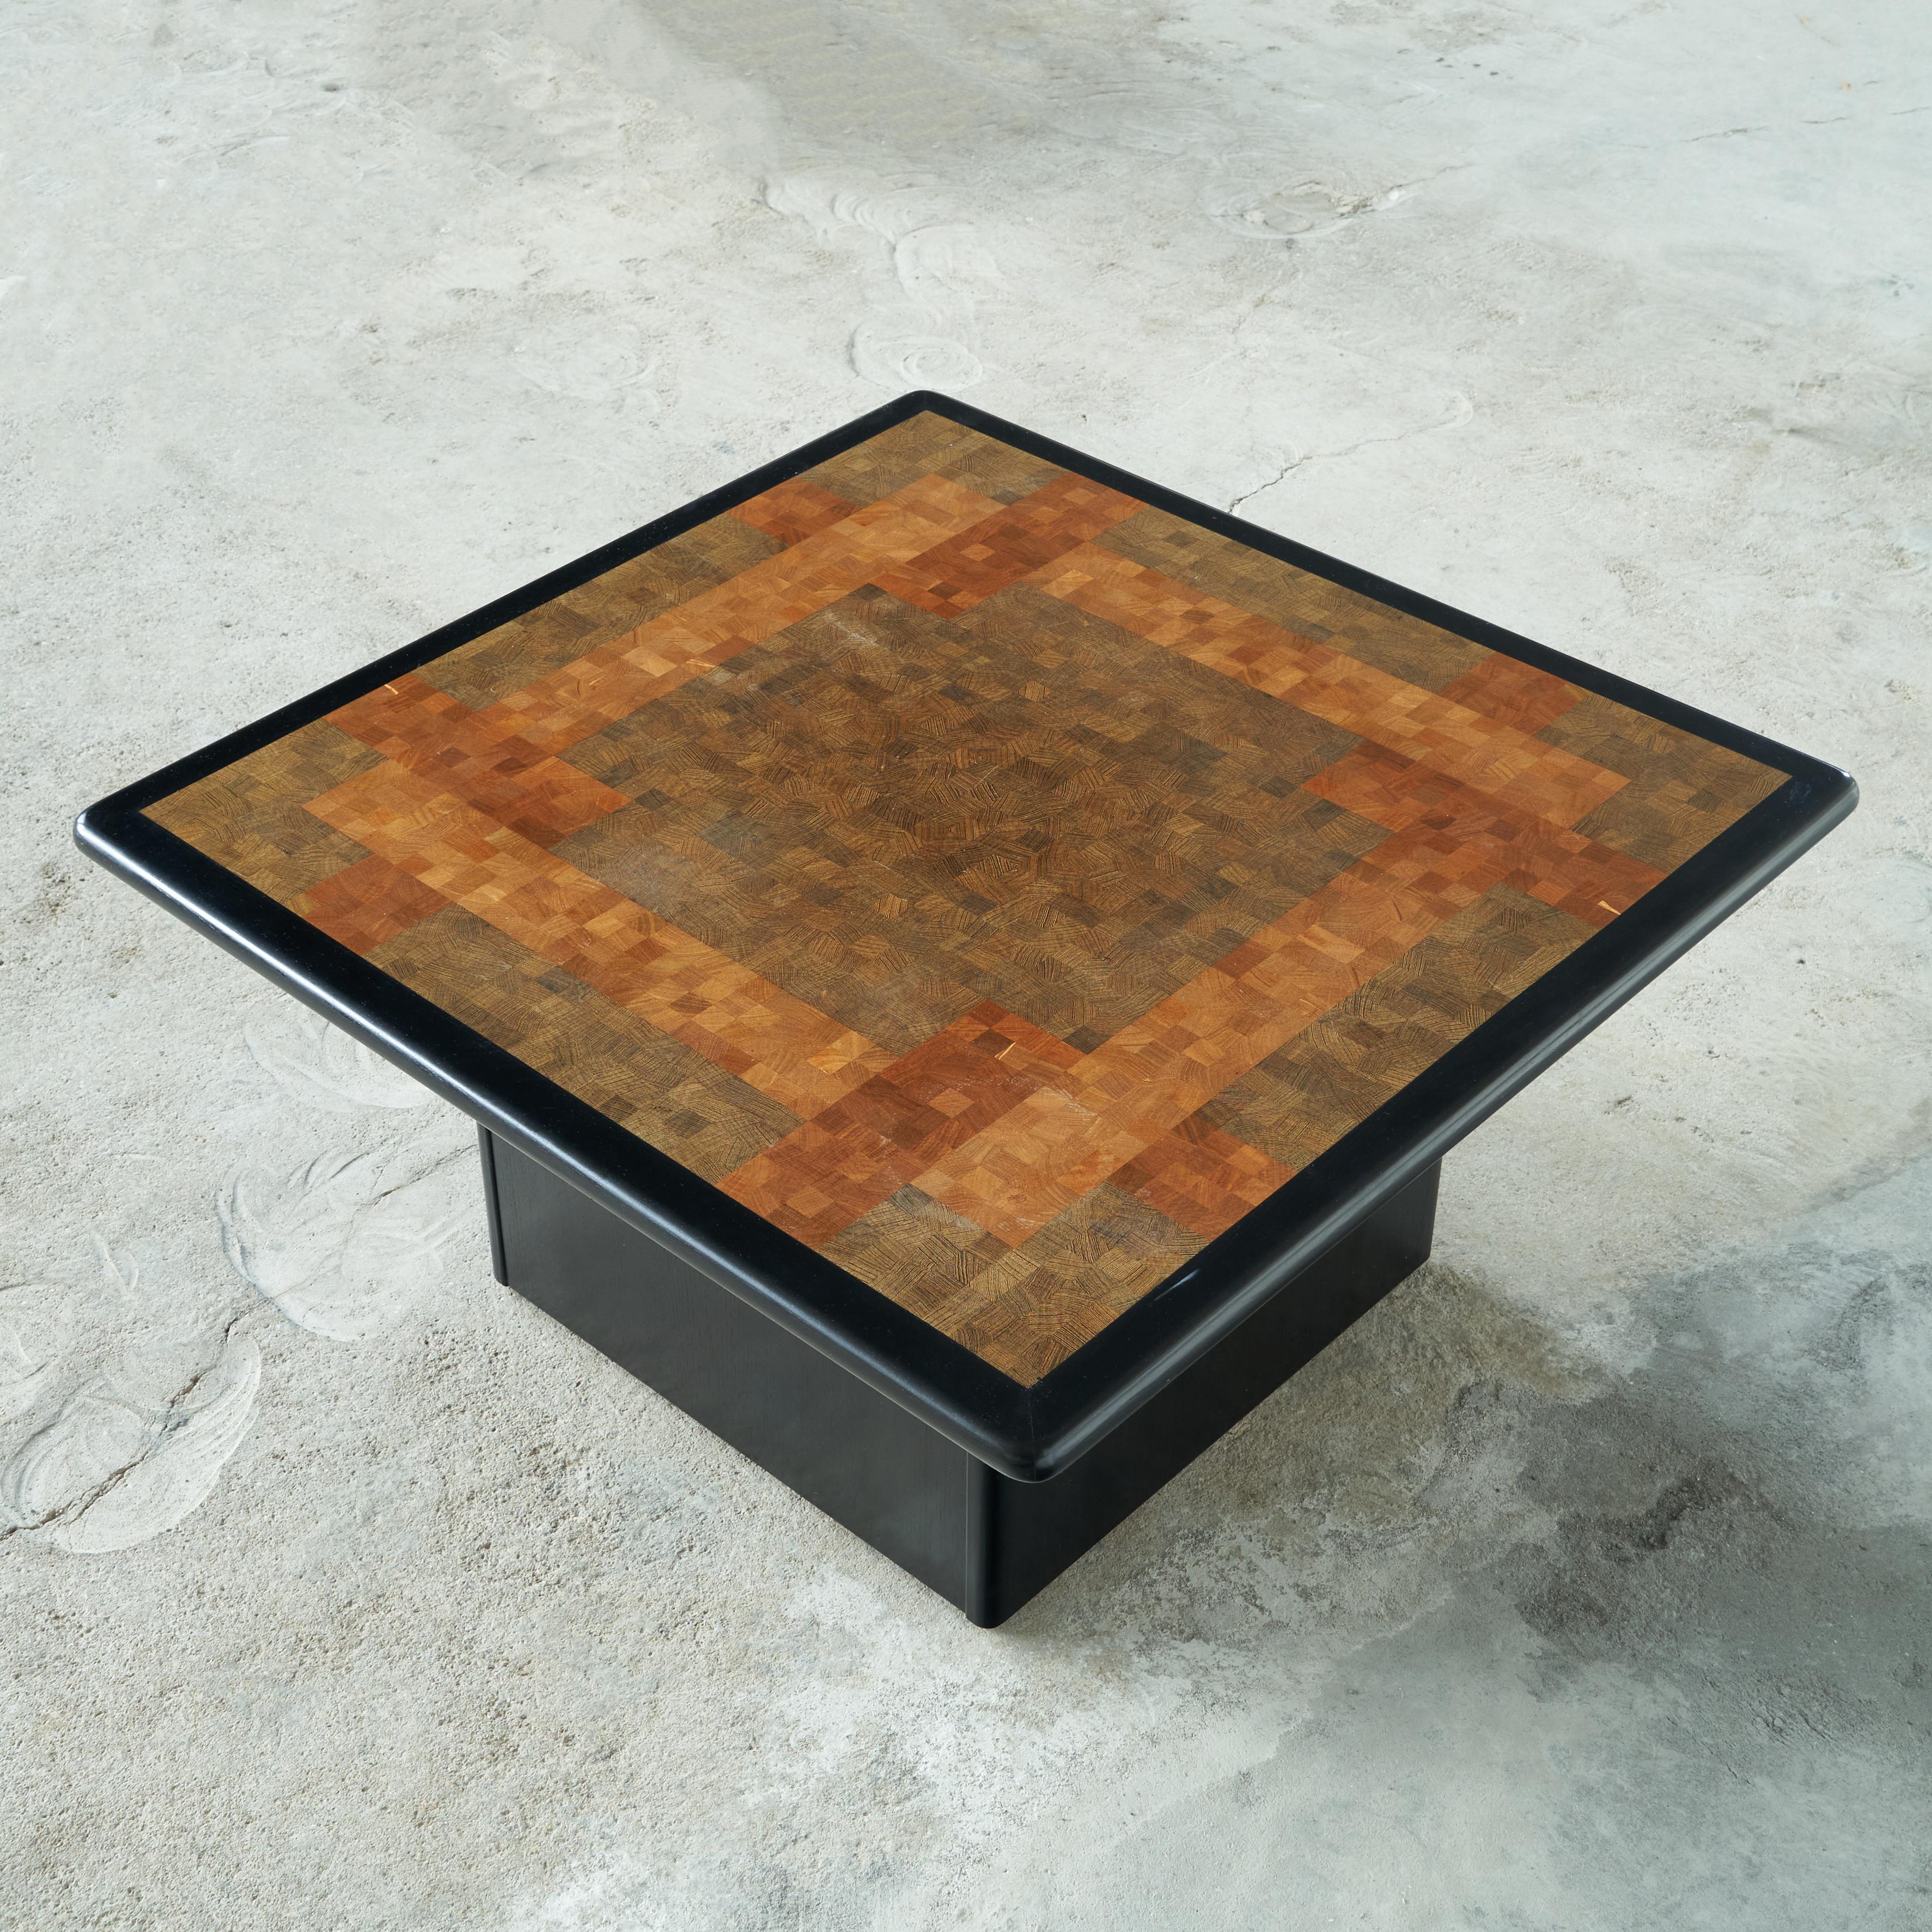 Rolf Middelboe & Gorm Lindum End-Grain Mosaic coffee table for Tranekaer Denmark. Late 20th century. 

This is a very interesting coffee table with a mosaic of inlayed end-grain wood. These colorful end-grain pieces are inlayed in a very